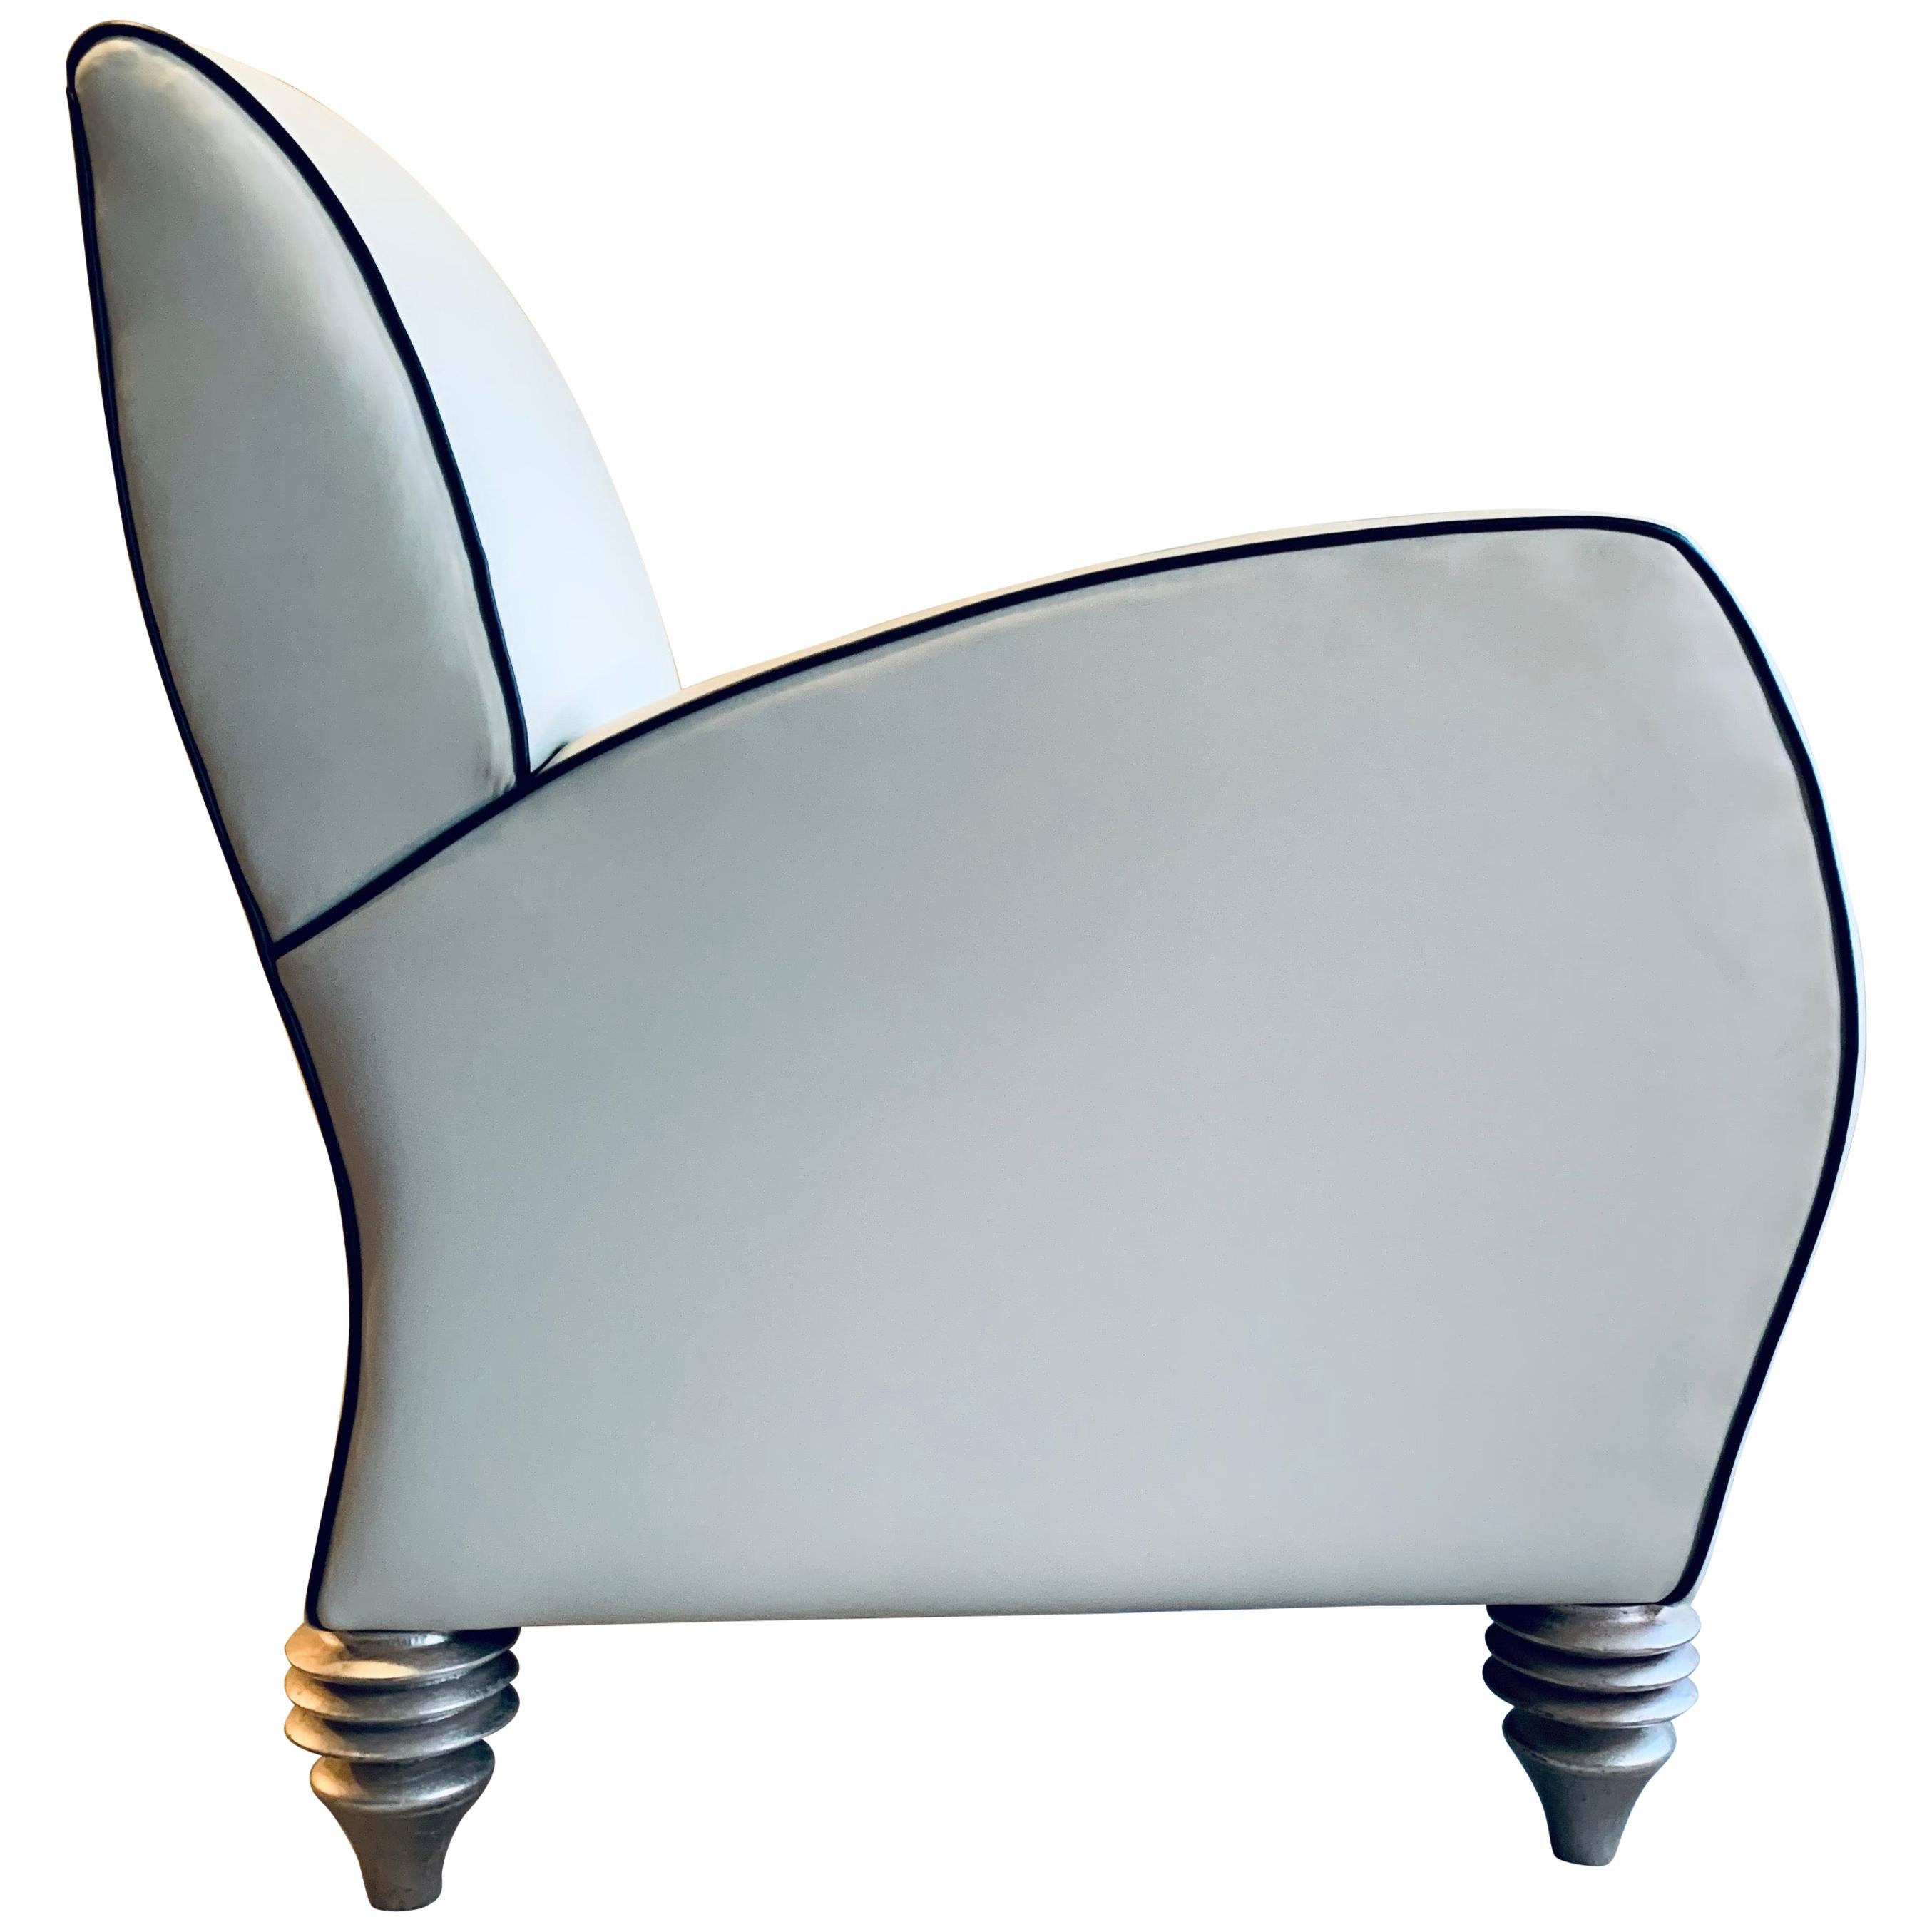 Art Deco Style Cream Leather Club Chair by Larry Laslo for Directional